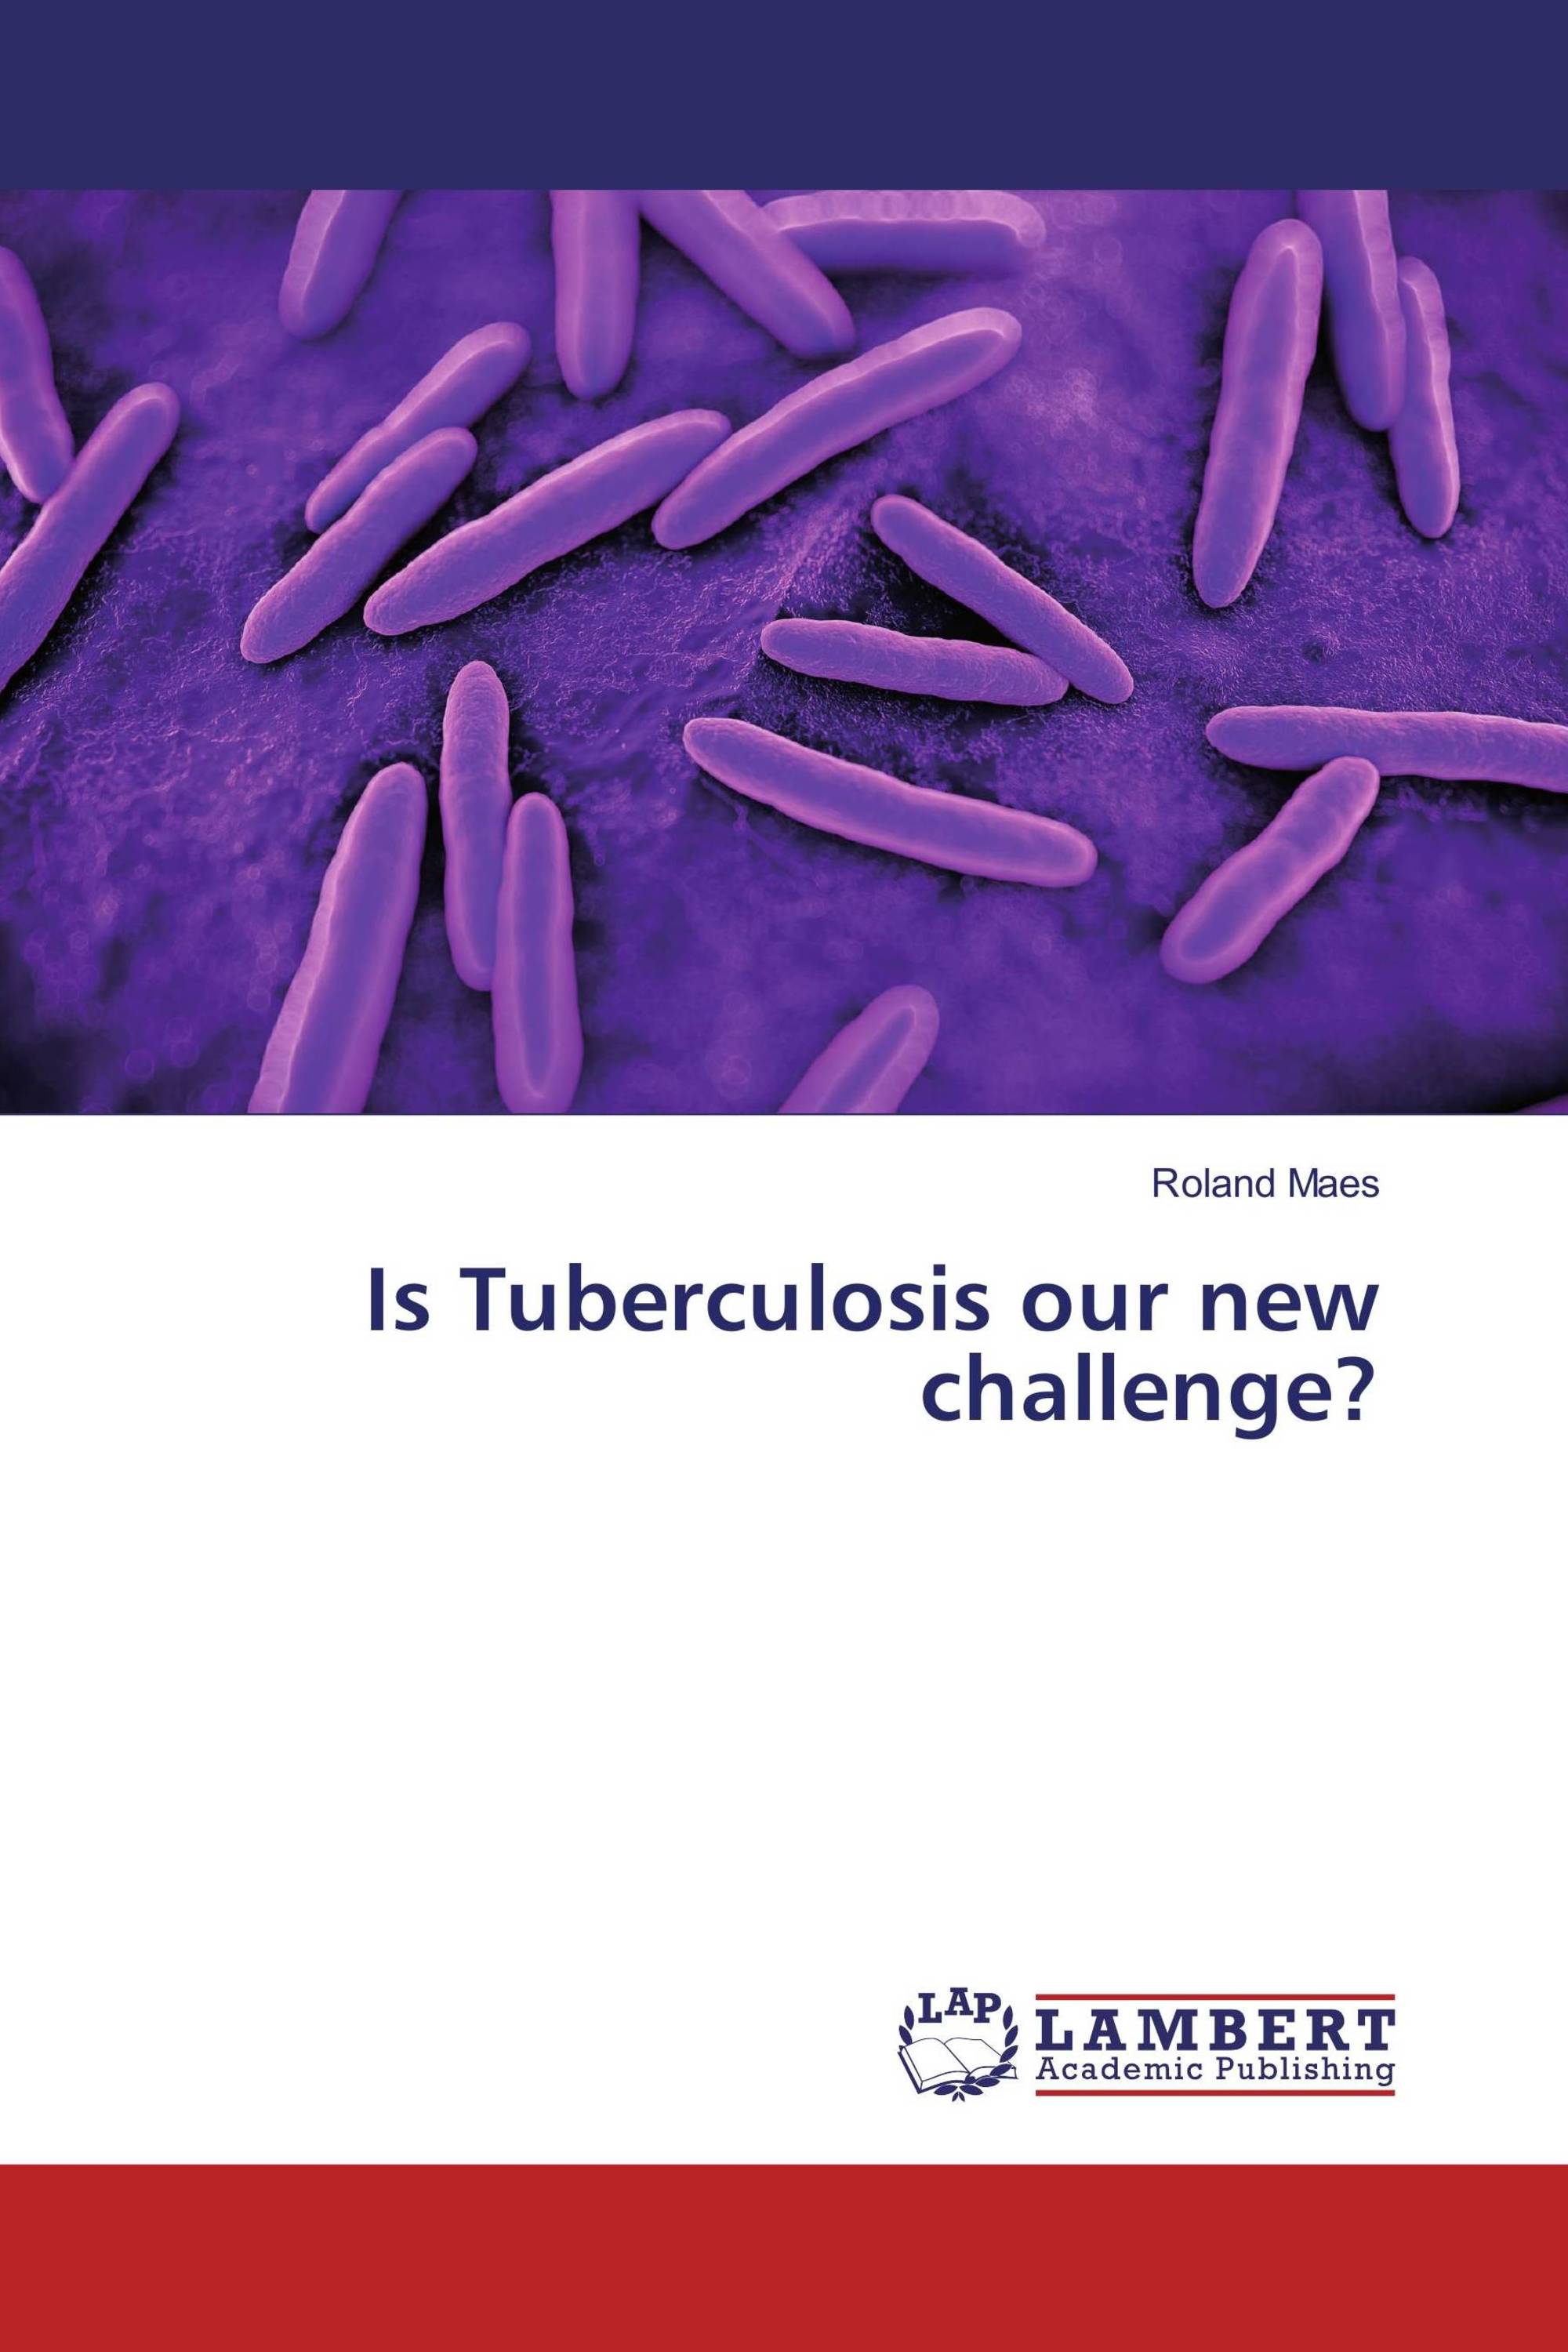 thesis on tuberculosis